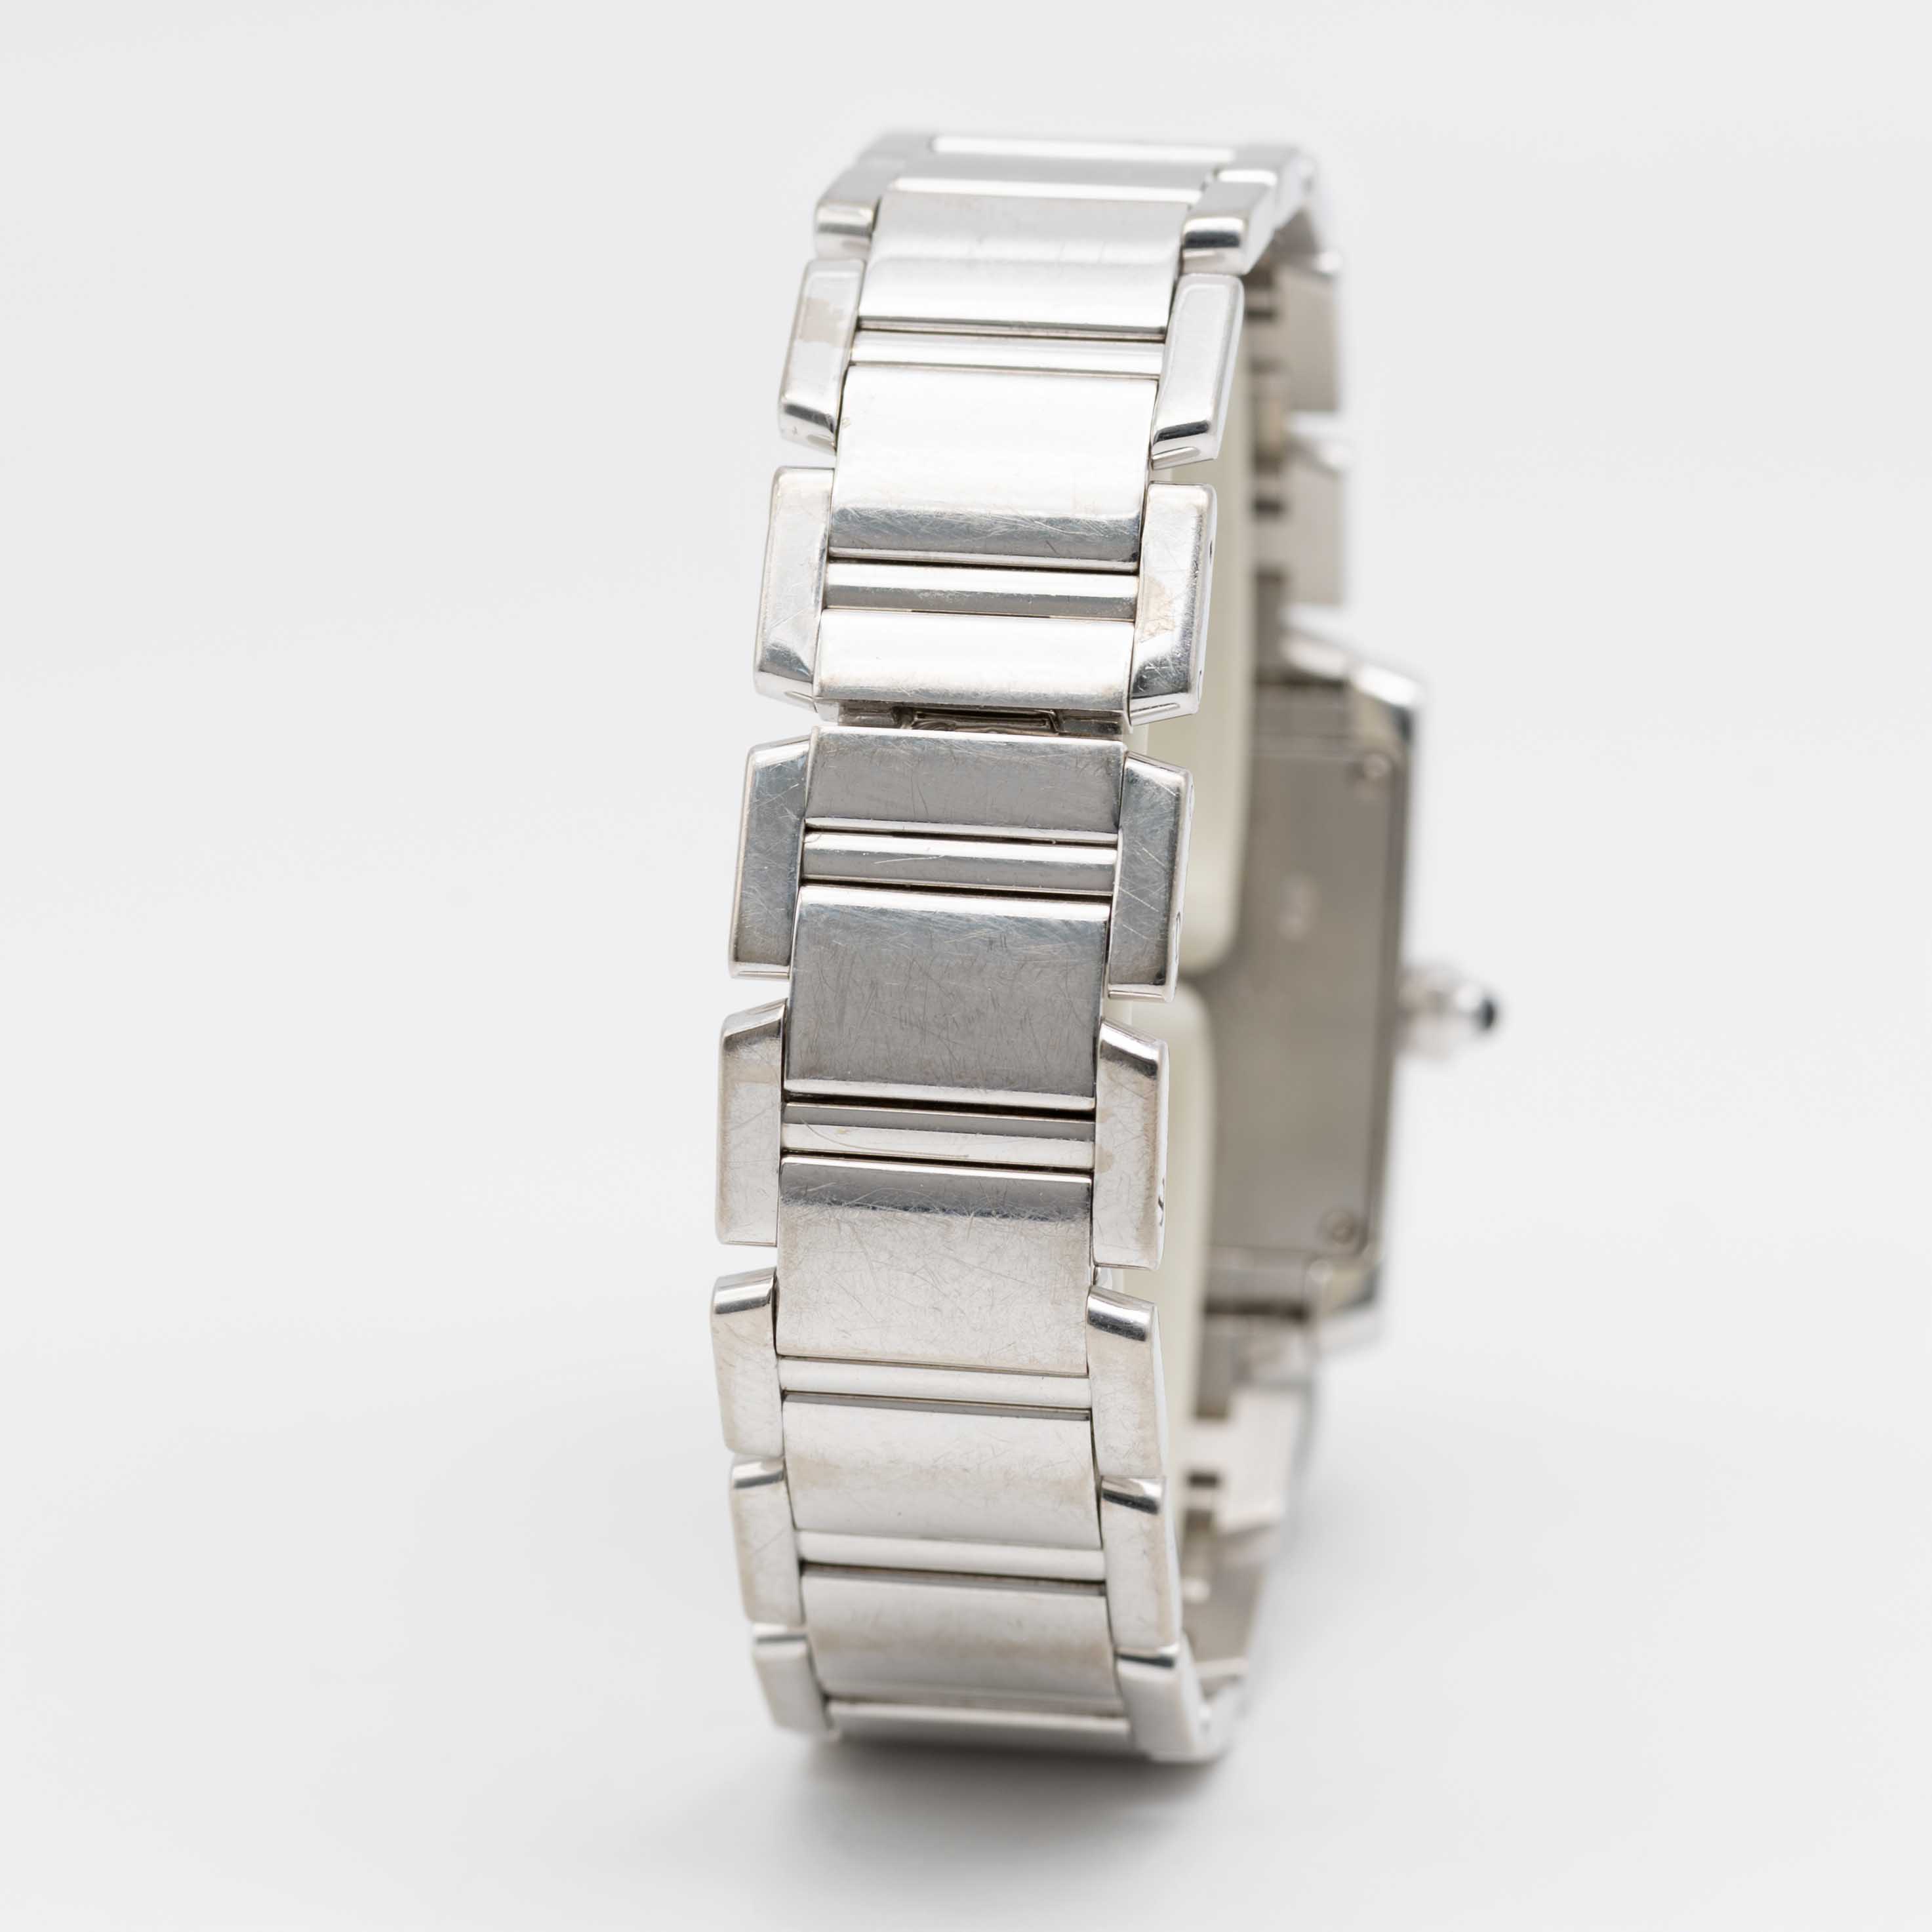 A LADIES 18K SOLID WHITE GOLD CARTIER TANK FRANCAISE BRACELET WATCH CIRCA 2005, REF. 2403 - Image 5 of 9